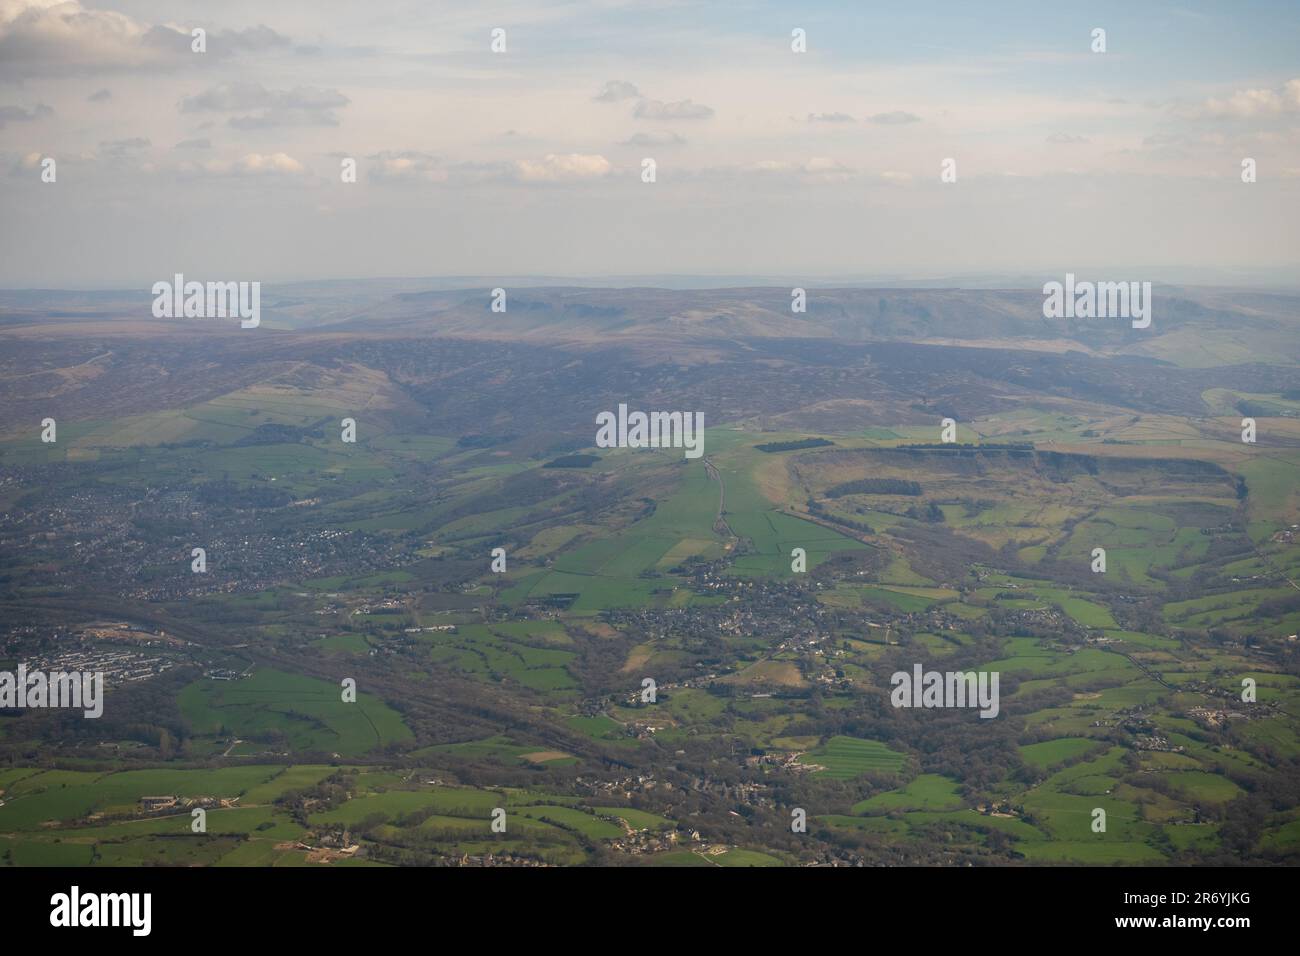 Glossop and Kinder Scout seen from height. Stock Photo